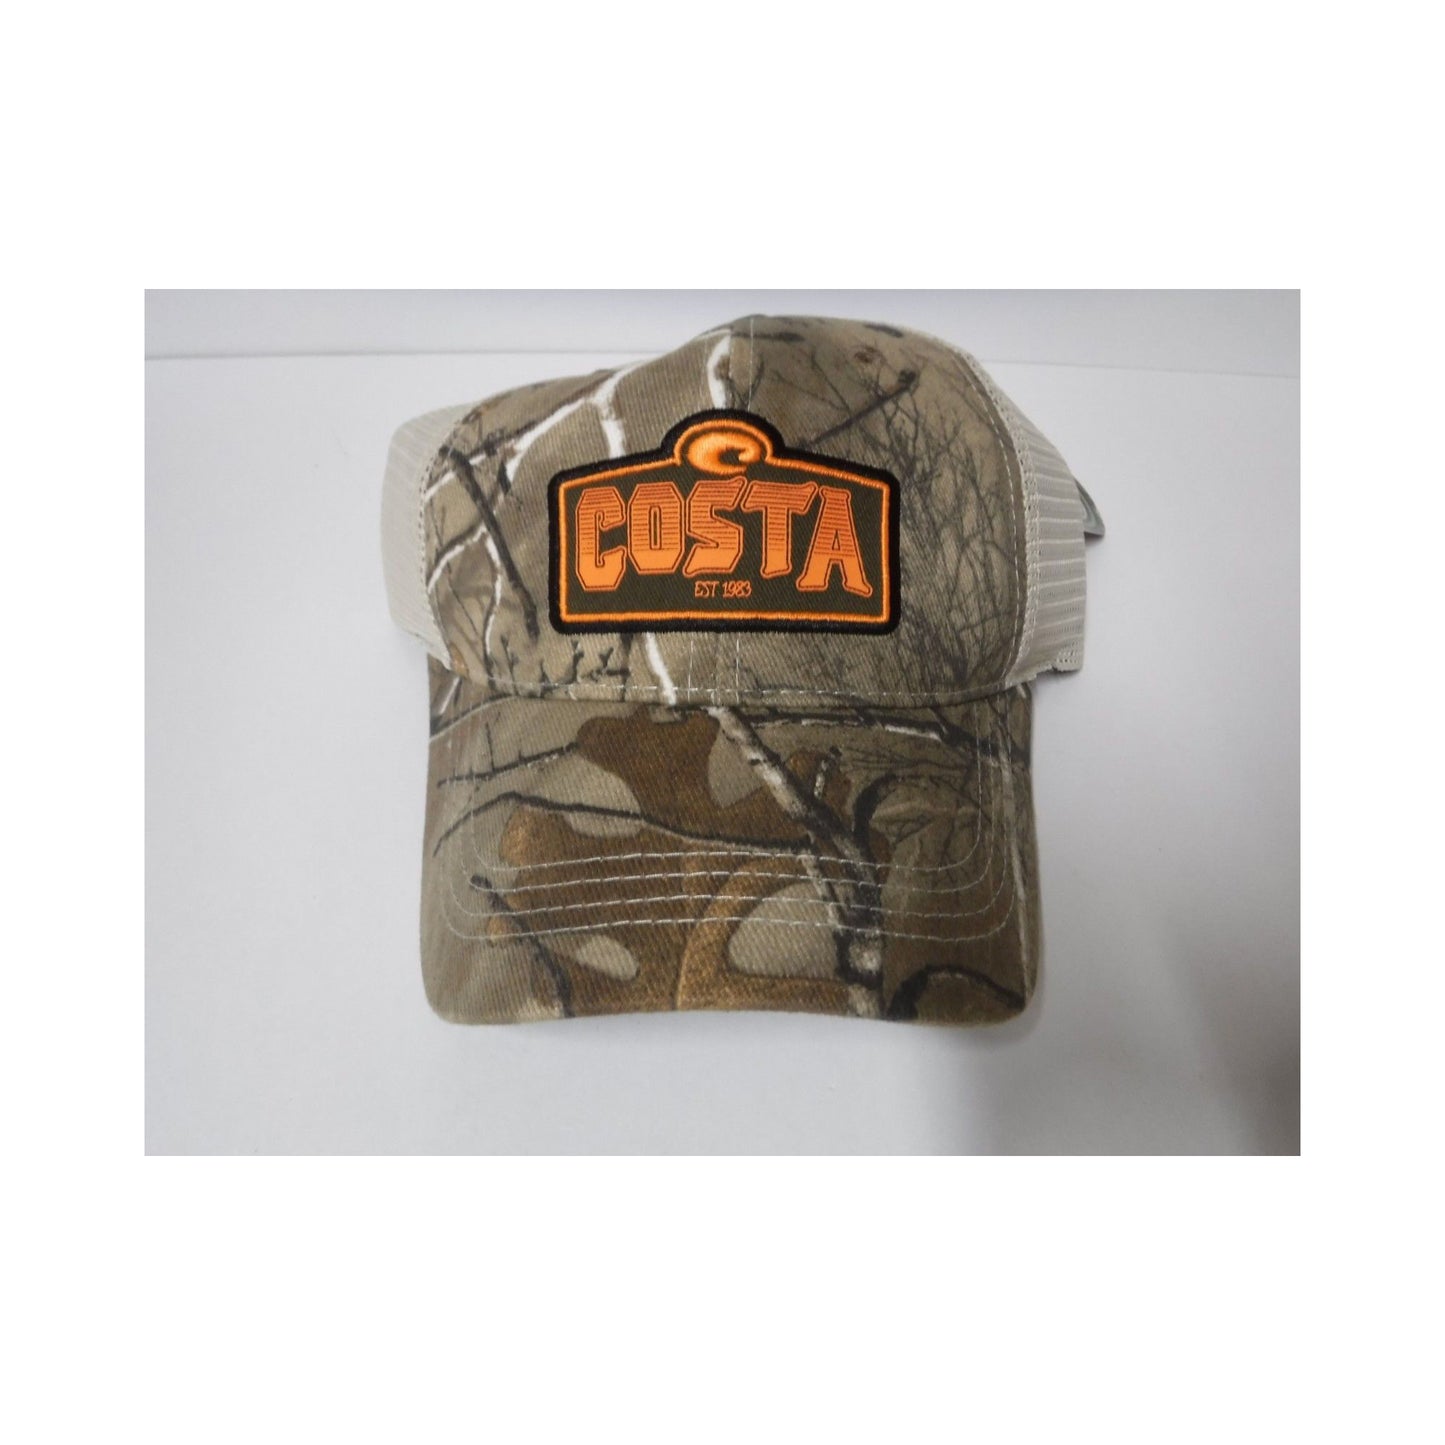 New Authentic Costa Hat Adjustable Realtree Extra Camo with Stone Logo